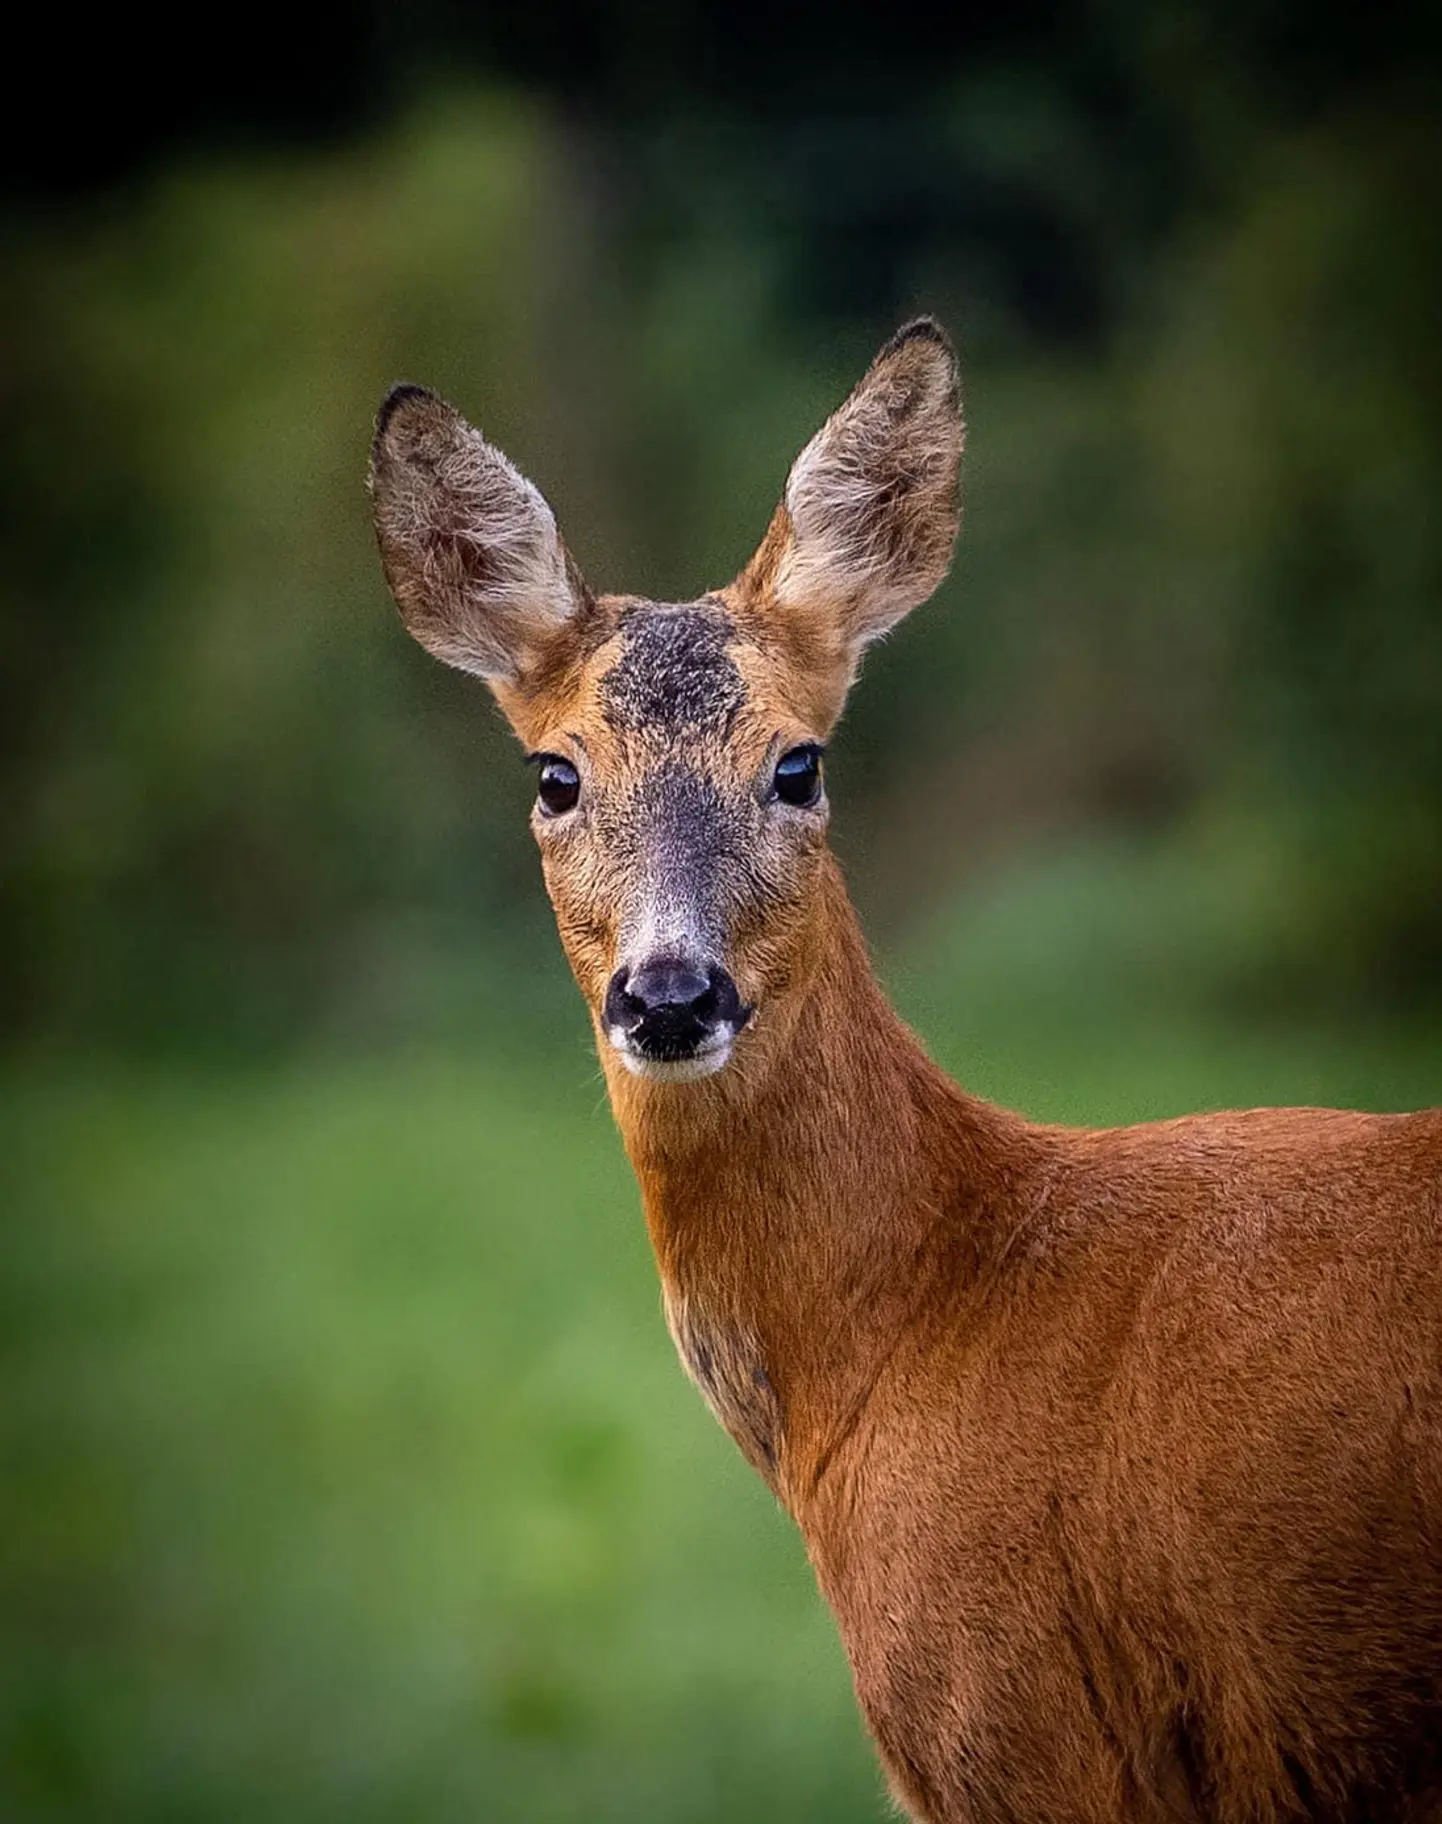  The torso and head of a deer appear in the picture as it stands in a green forest glade. Russet brown short hair with steaks of a lighter colour and darker brown patches on its front and down its long face. It has large, block, almond-like eyes on either side of its face with a tight black mouth and nose area. The ears are very large, sticking out from the top of its head, the insides have long, pale, fluffier- looking hair.